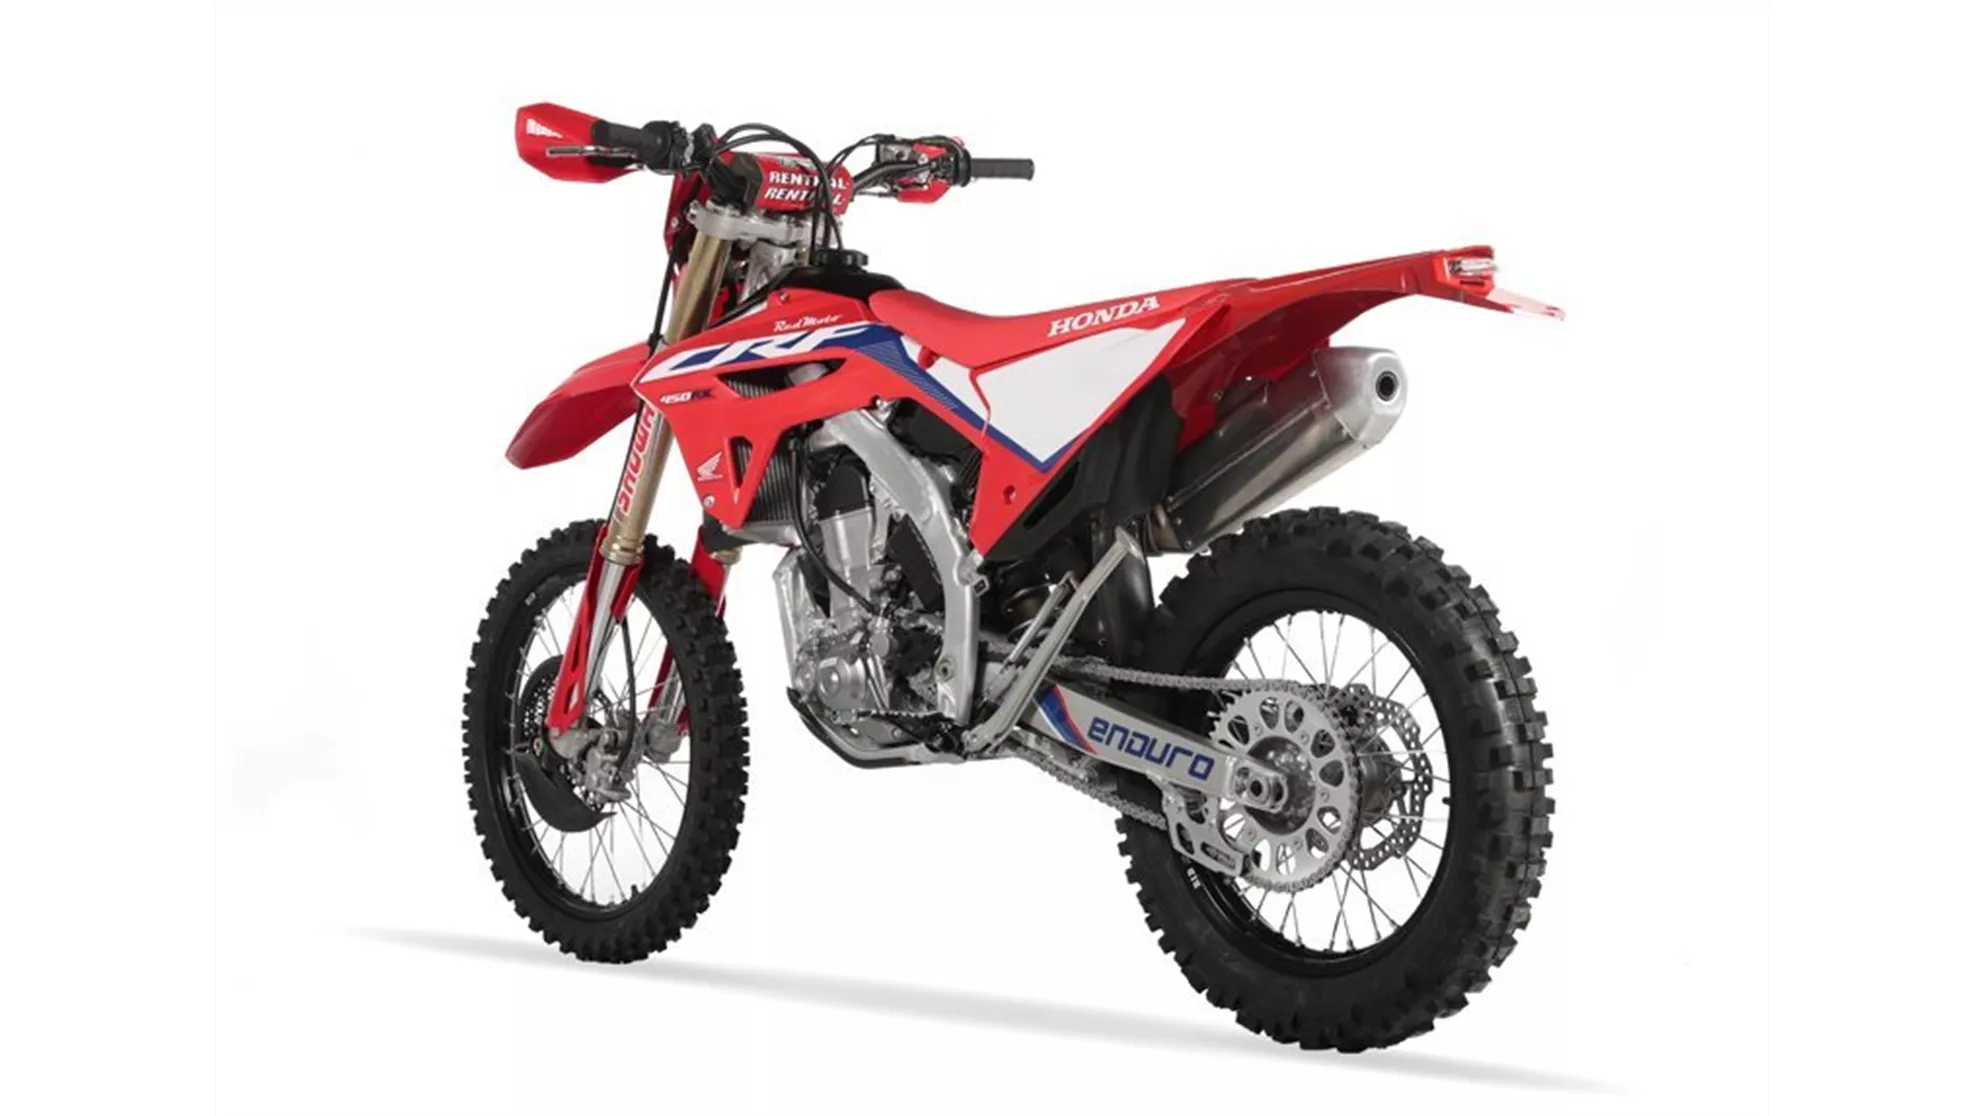 Red Moto CRF 450RX Enduro Special - Image 11